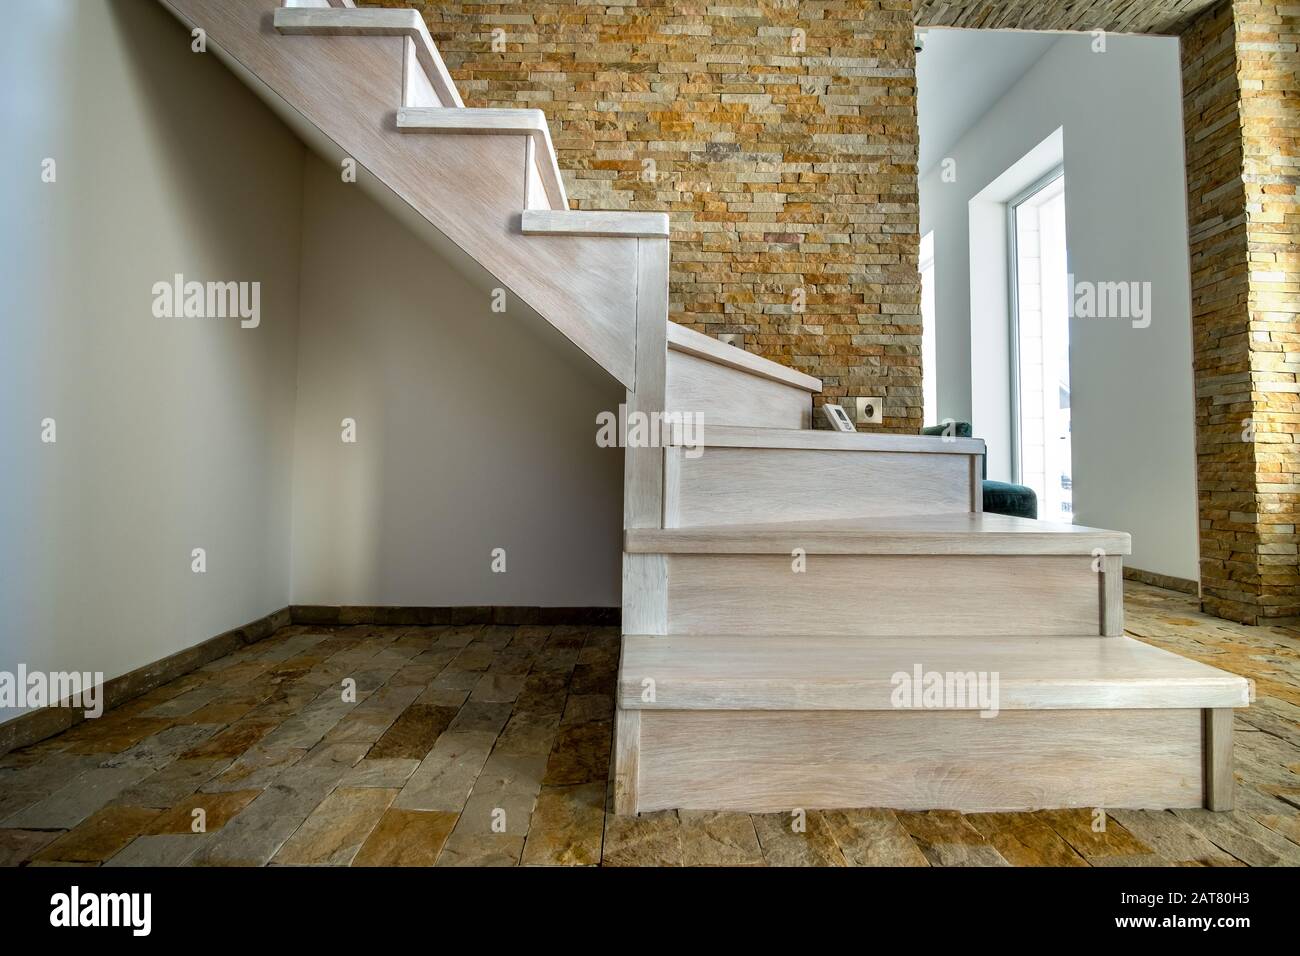 Stylish wooden contemporary staircase inside loft house interior. Modern hallway with decorative limestone brick walls and white oak stairs. Stock Photo